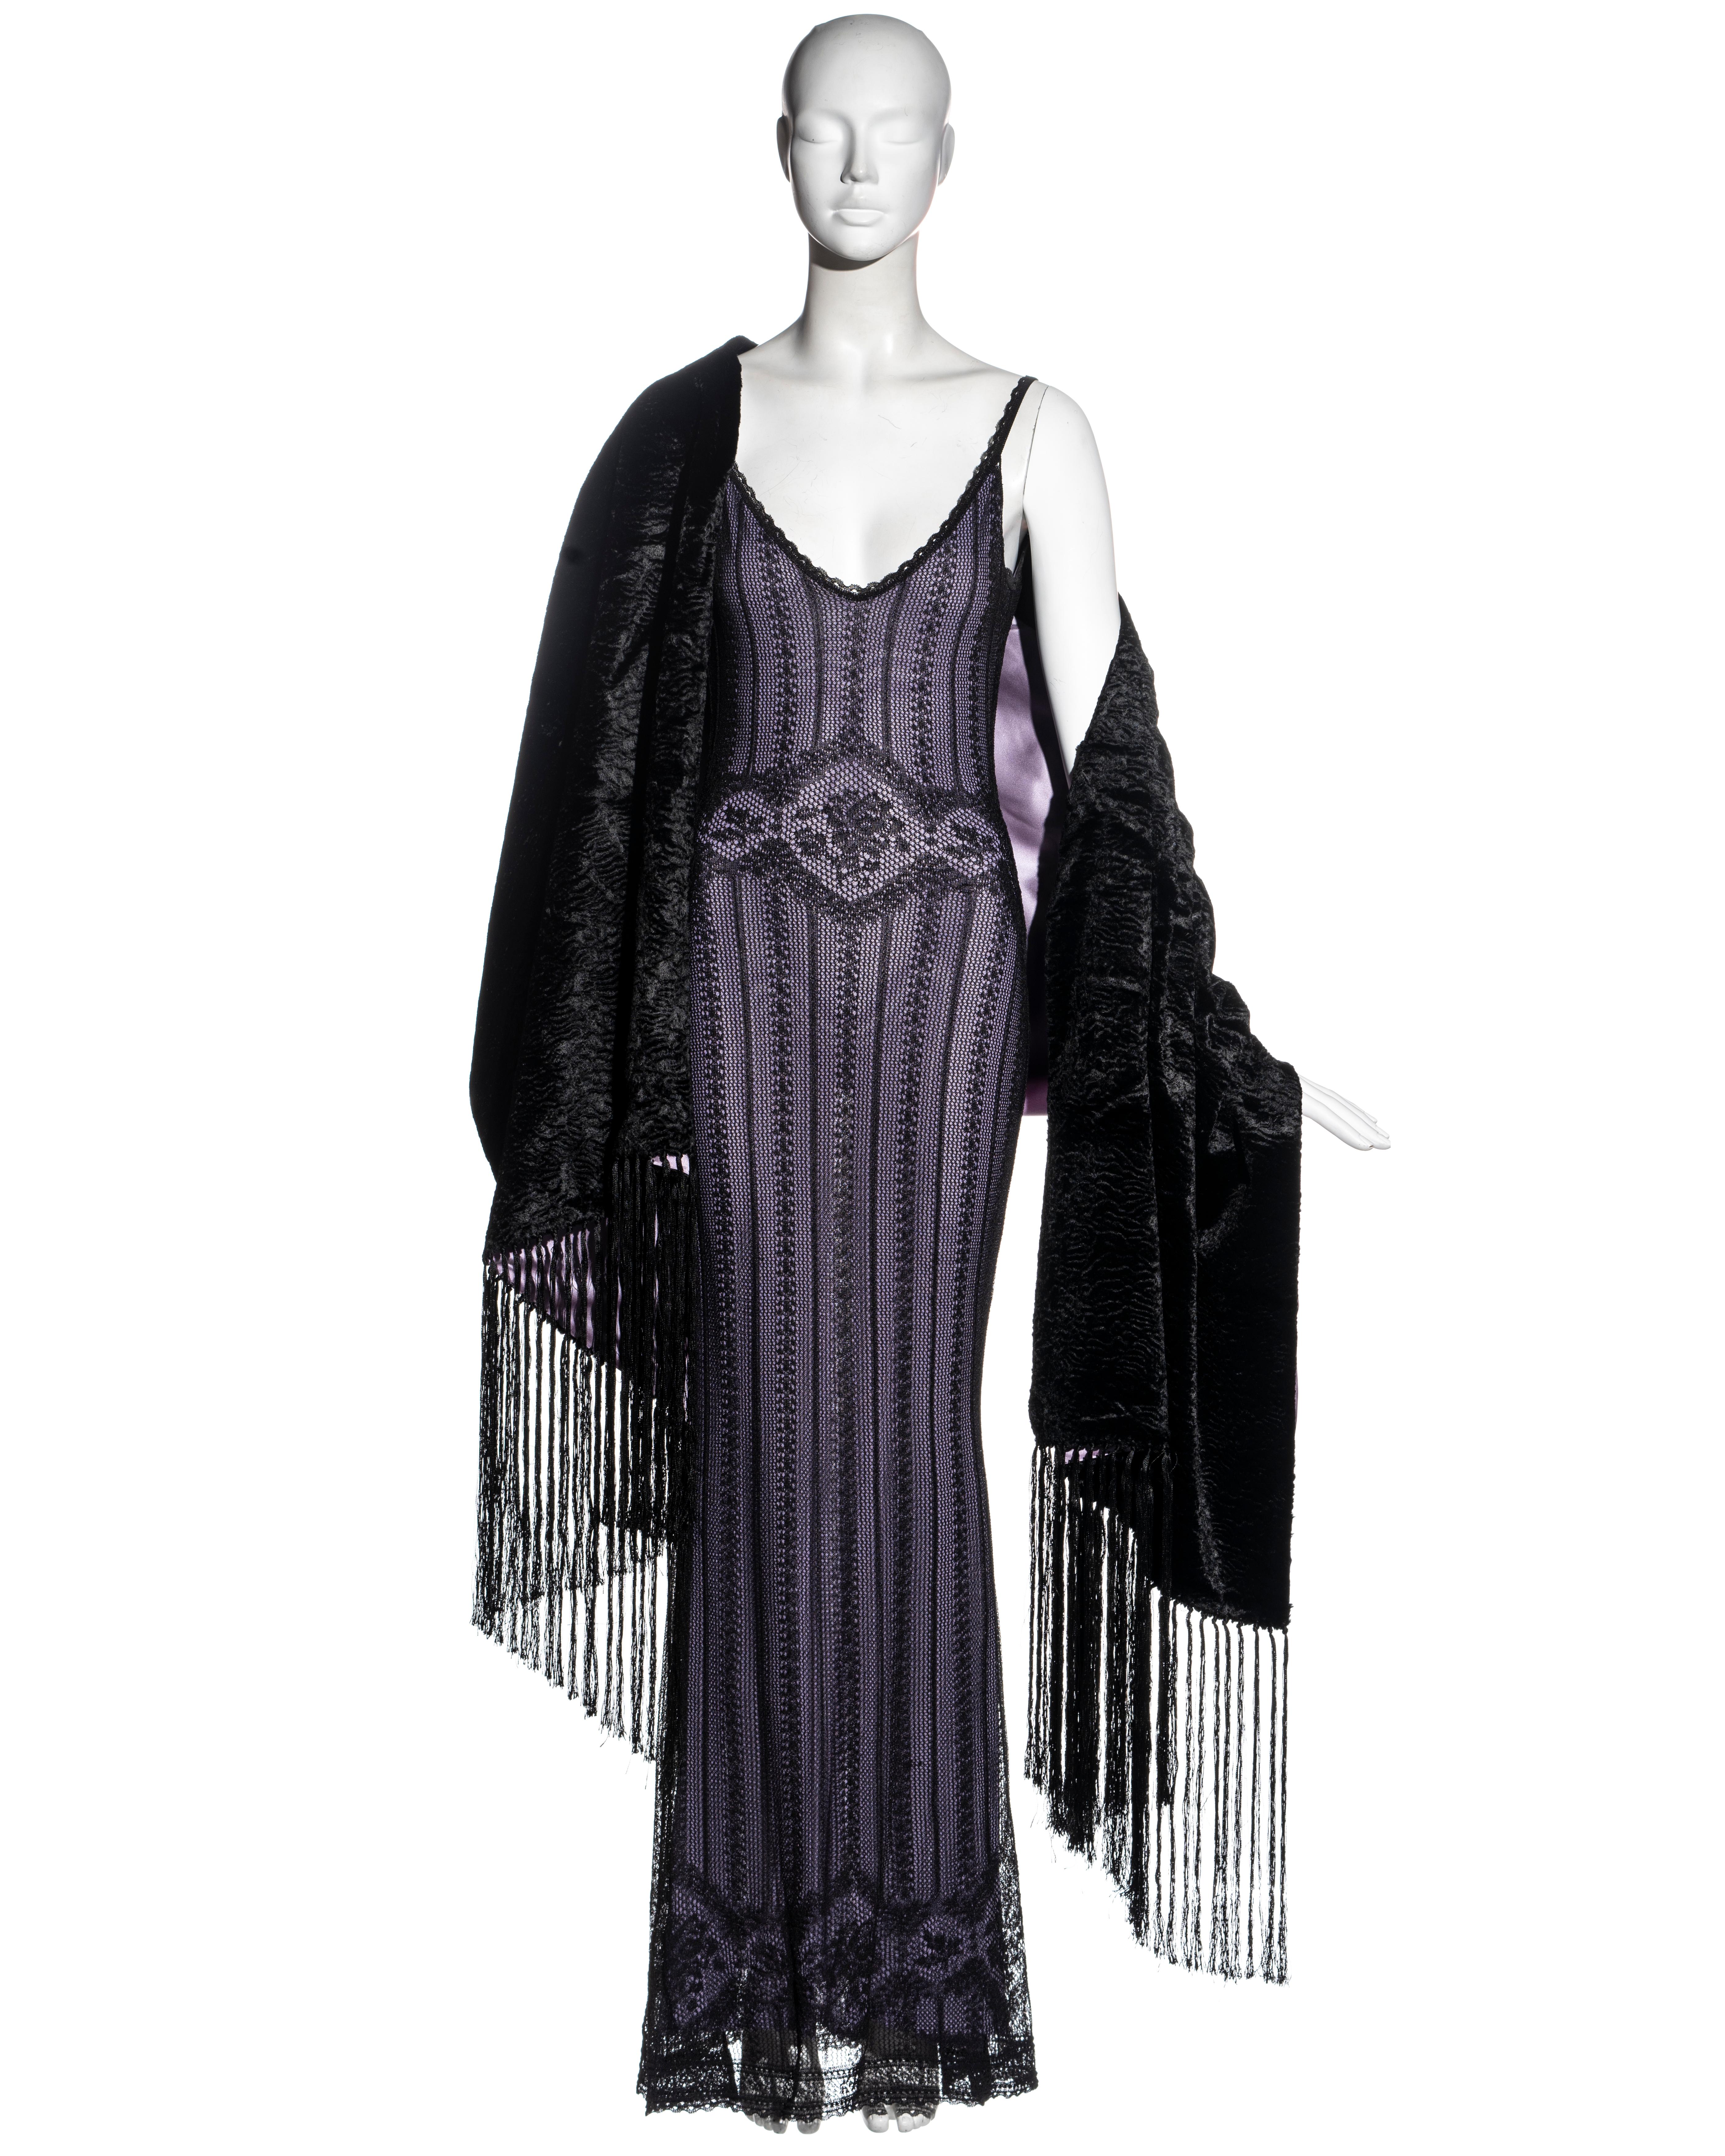 ▪ Christian Dior black lace floor-length evening dress
▪ Designed by John Galliano 
▪ Double-layered 
▪ Fine knitted lace
▪ Purple viscose-knit underdress 
▪ Large faux astrakhan shawl with tassels and purple silk lining 
▪ Size Small
▪ Fall-Winter